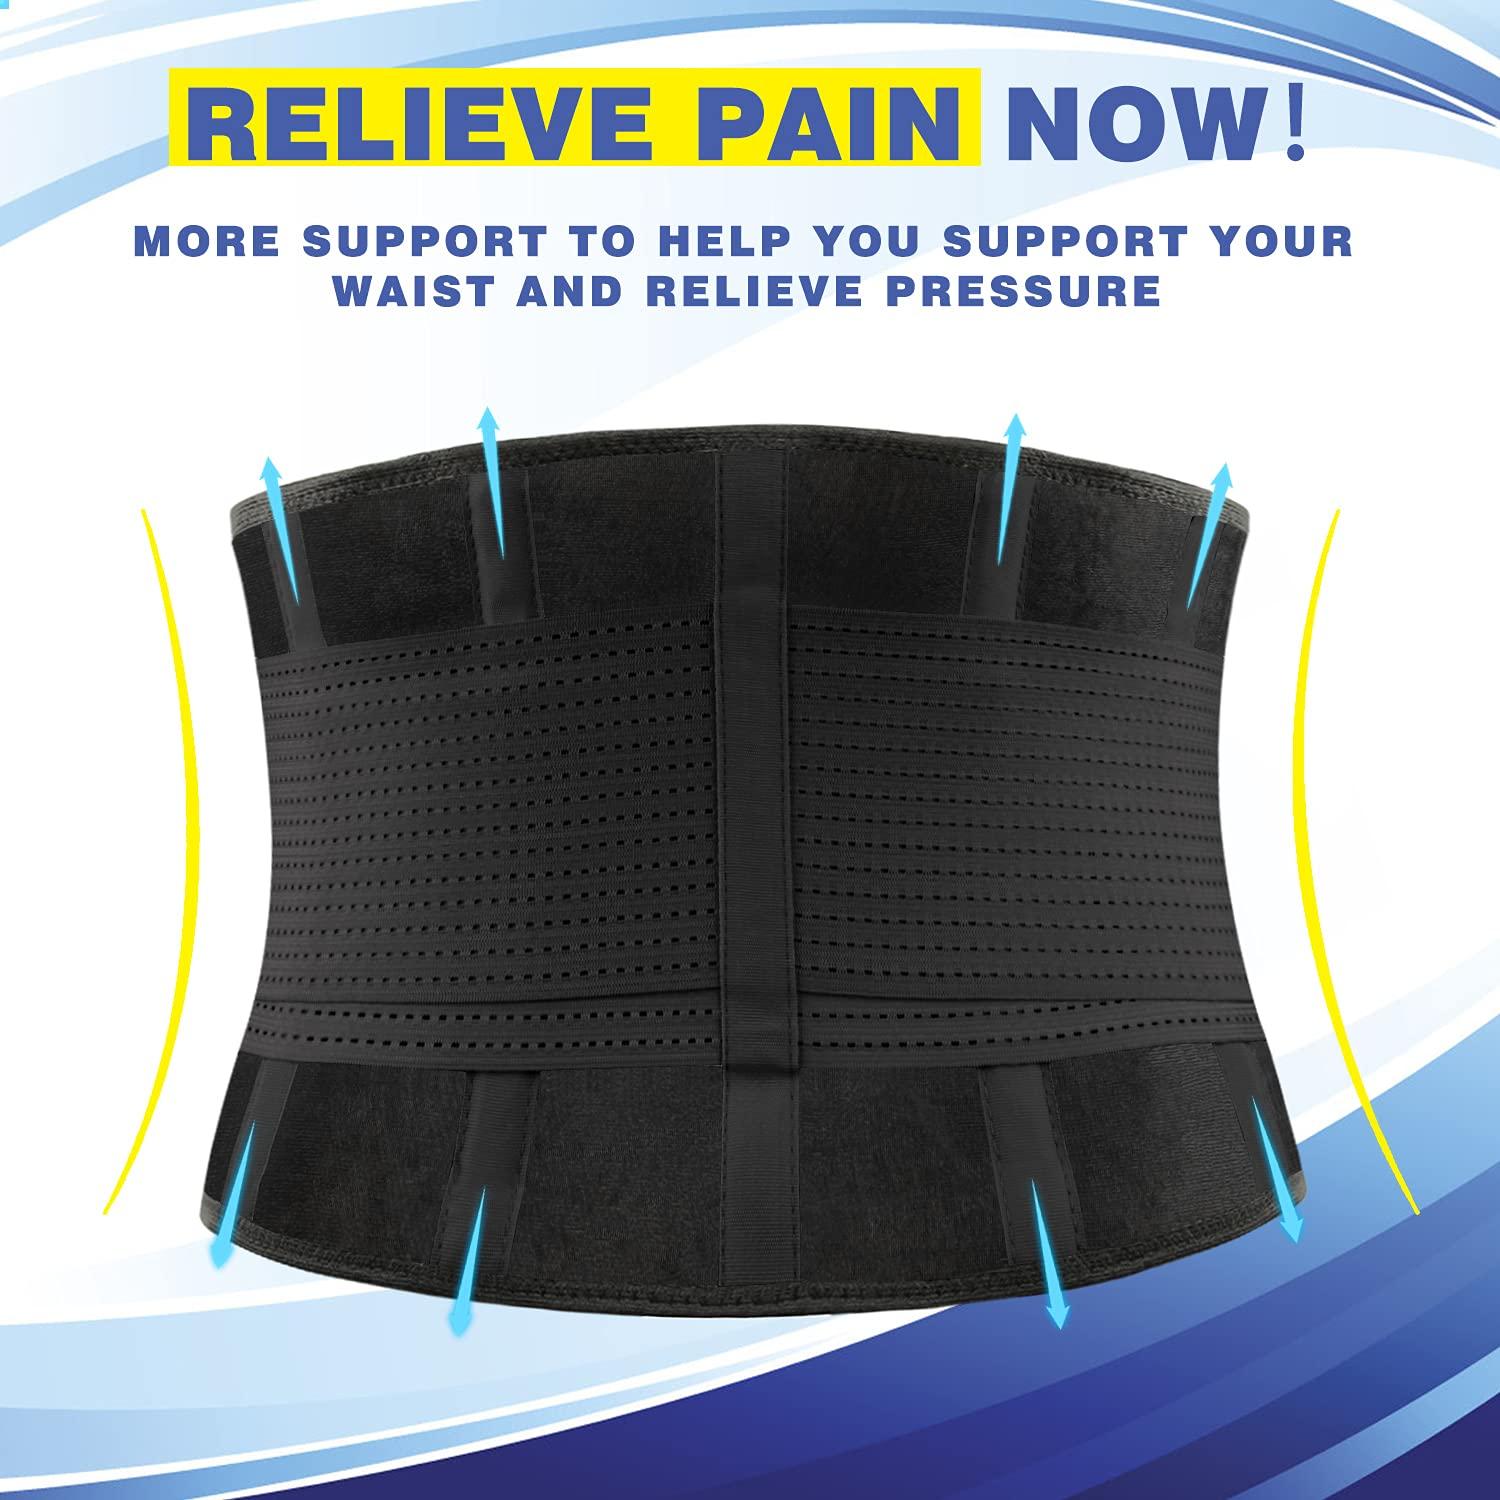 Back Brace for Lower Back Pain Relief - Back Support Belt for Sciatica,  Herniated Disc, Scoliosis and More - Lumbar Support to Improve Posture -  Keep Back Straight for Men and Women (